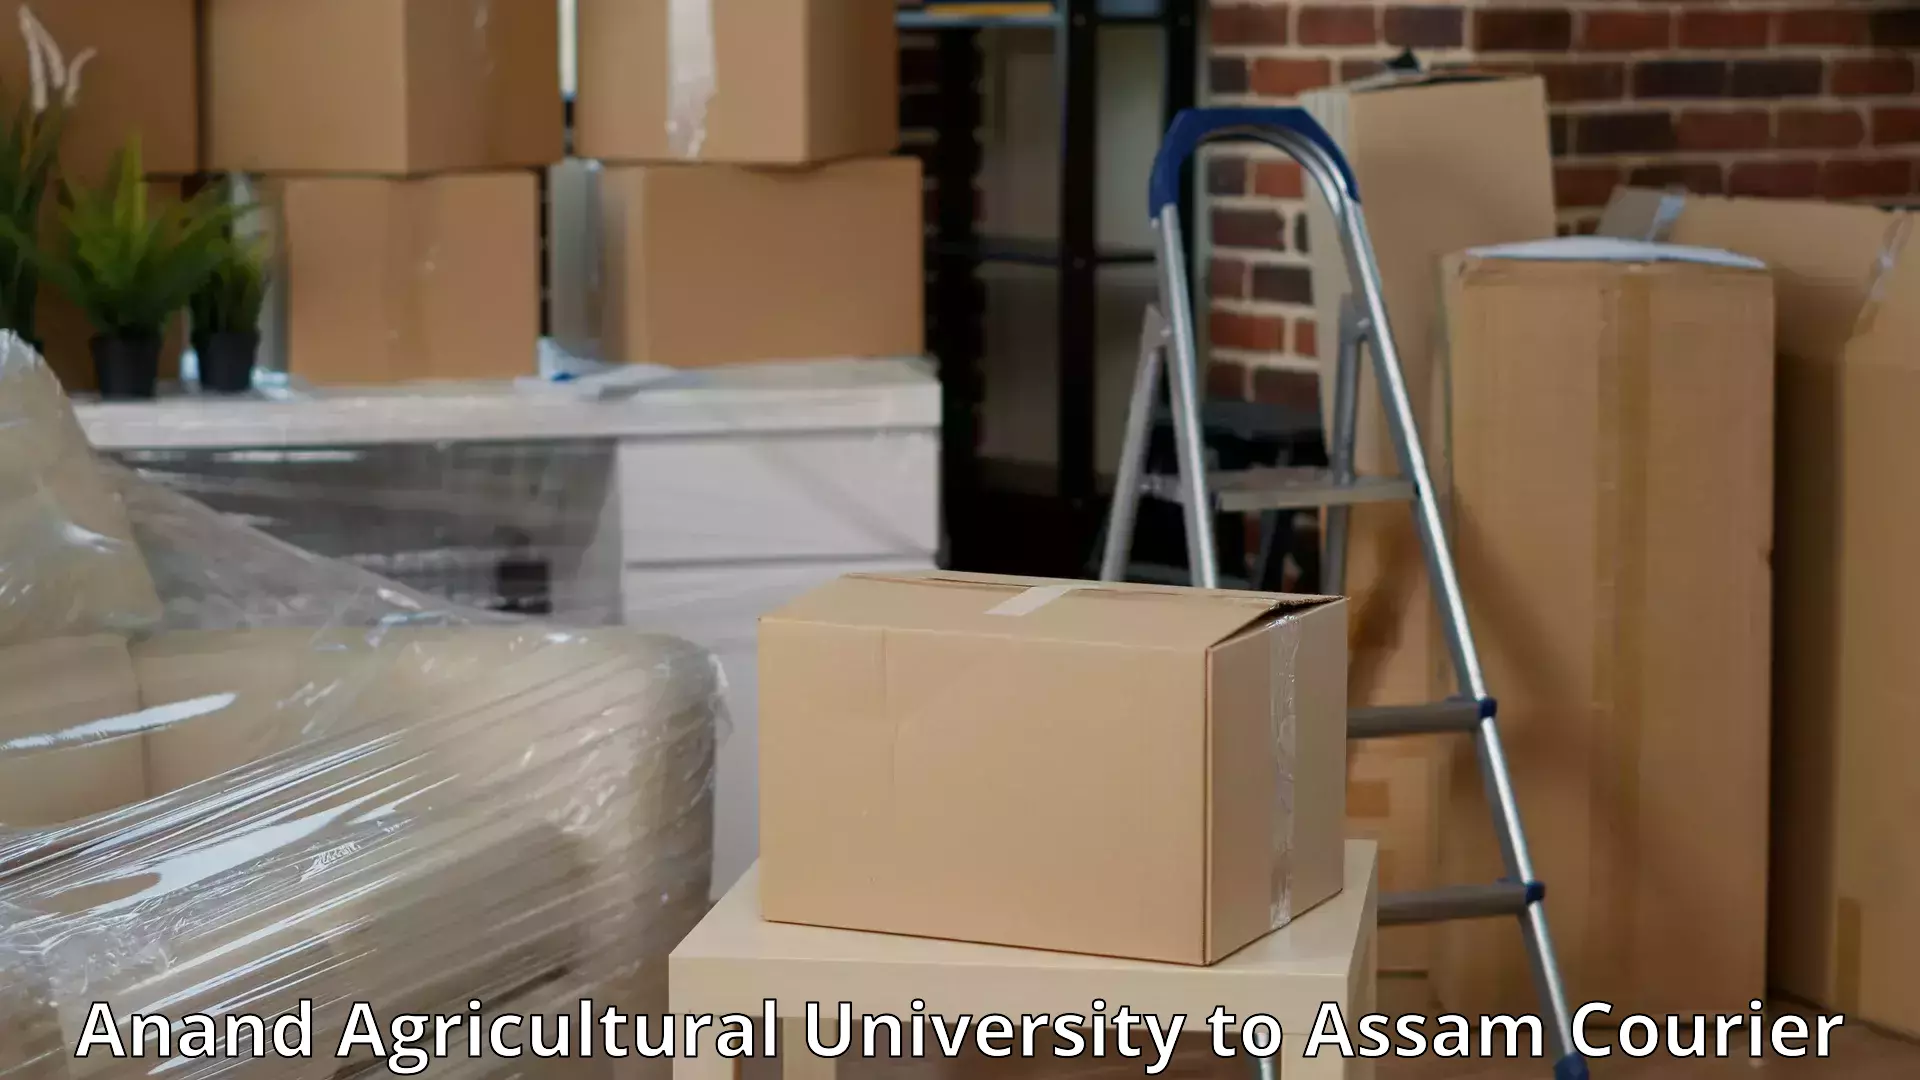 Quality furniture transport Anand Agricultural University to Guwahati University